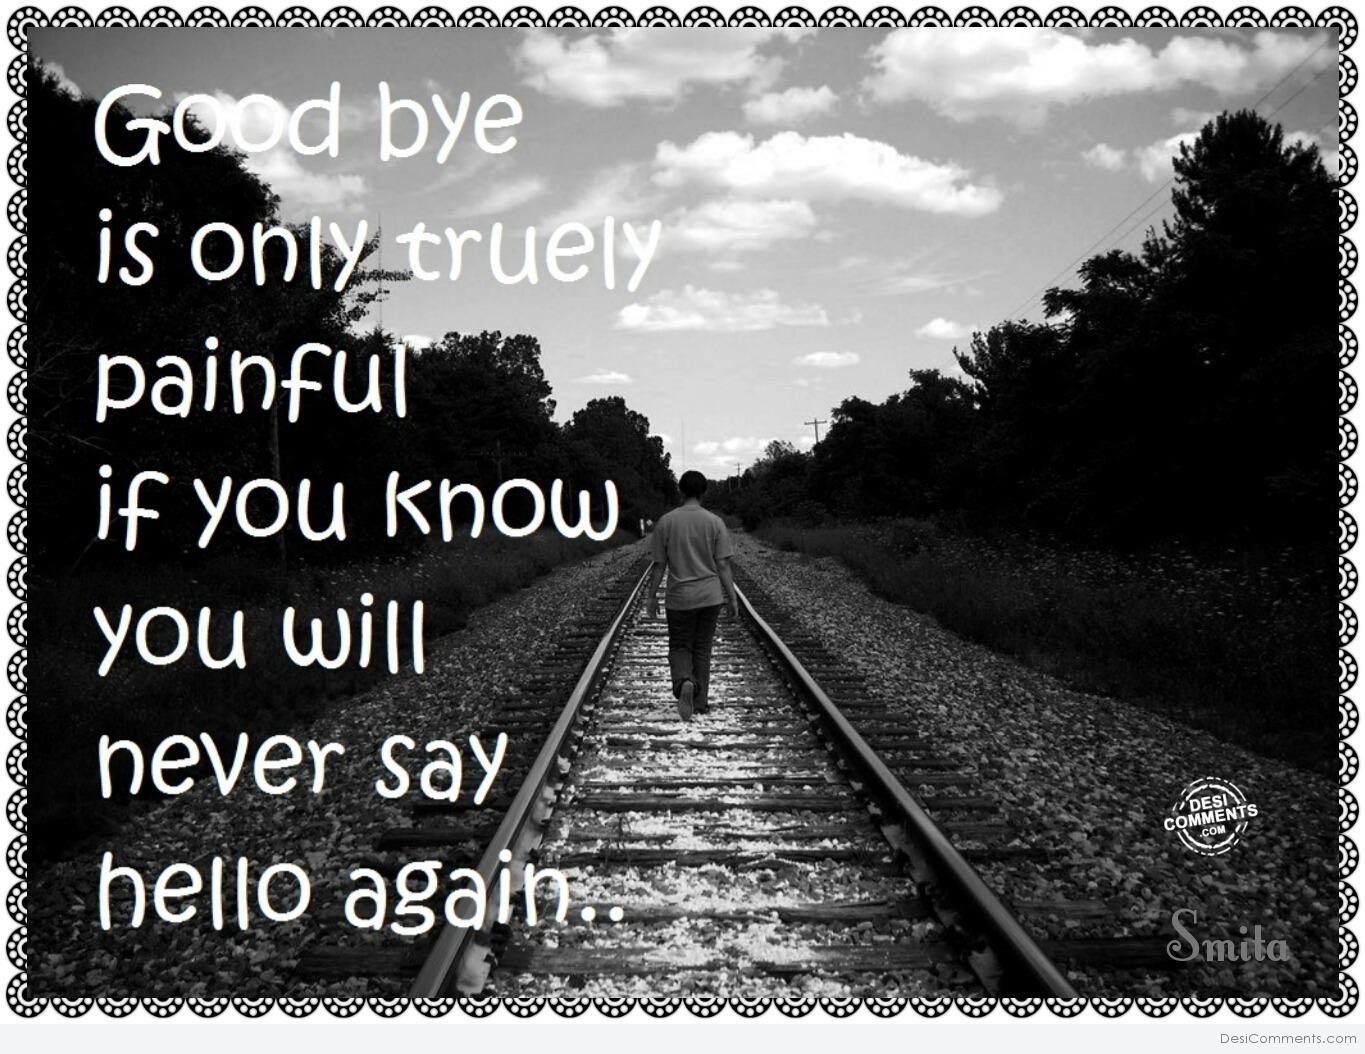 Goodbye is only truly painful… - DesiComments.com